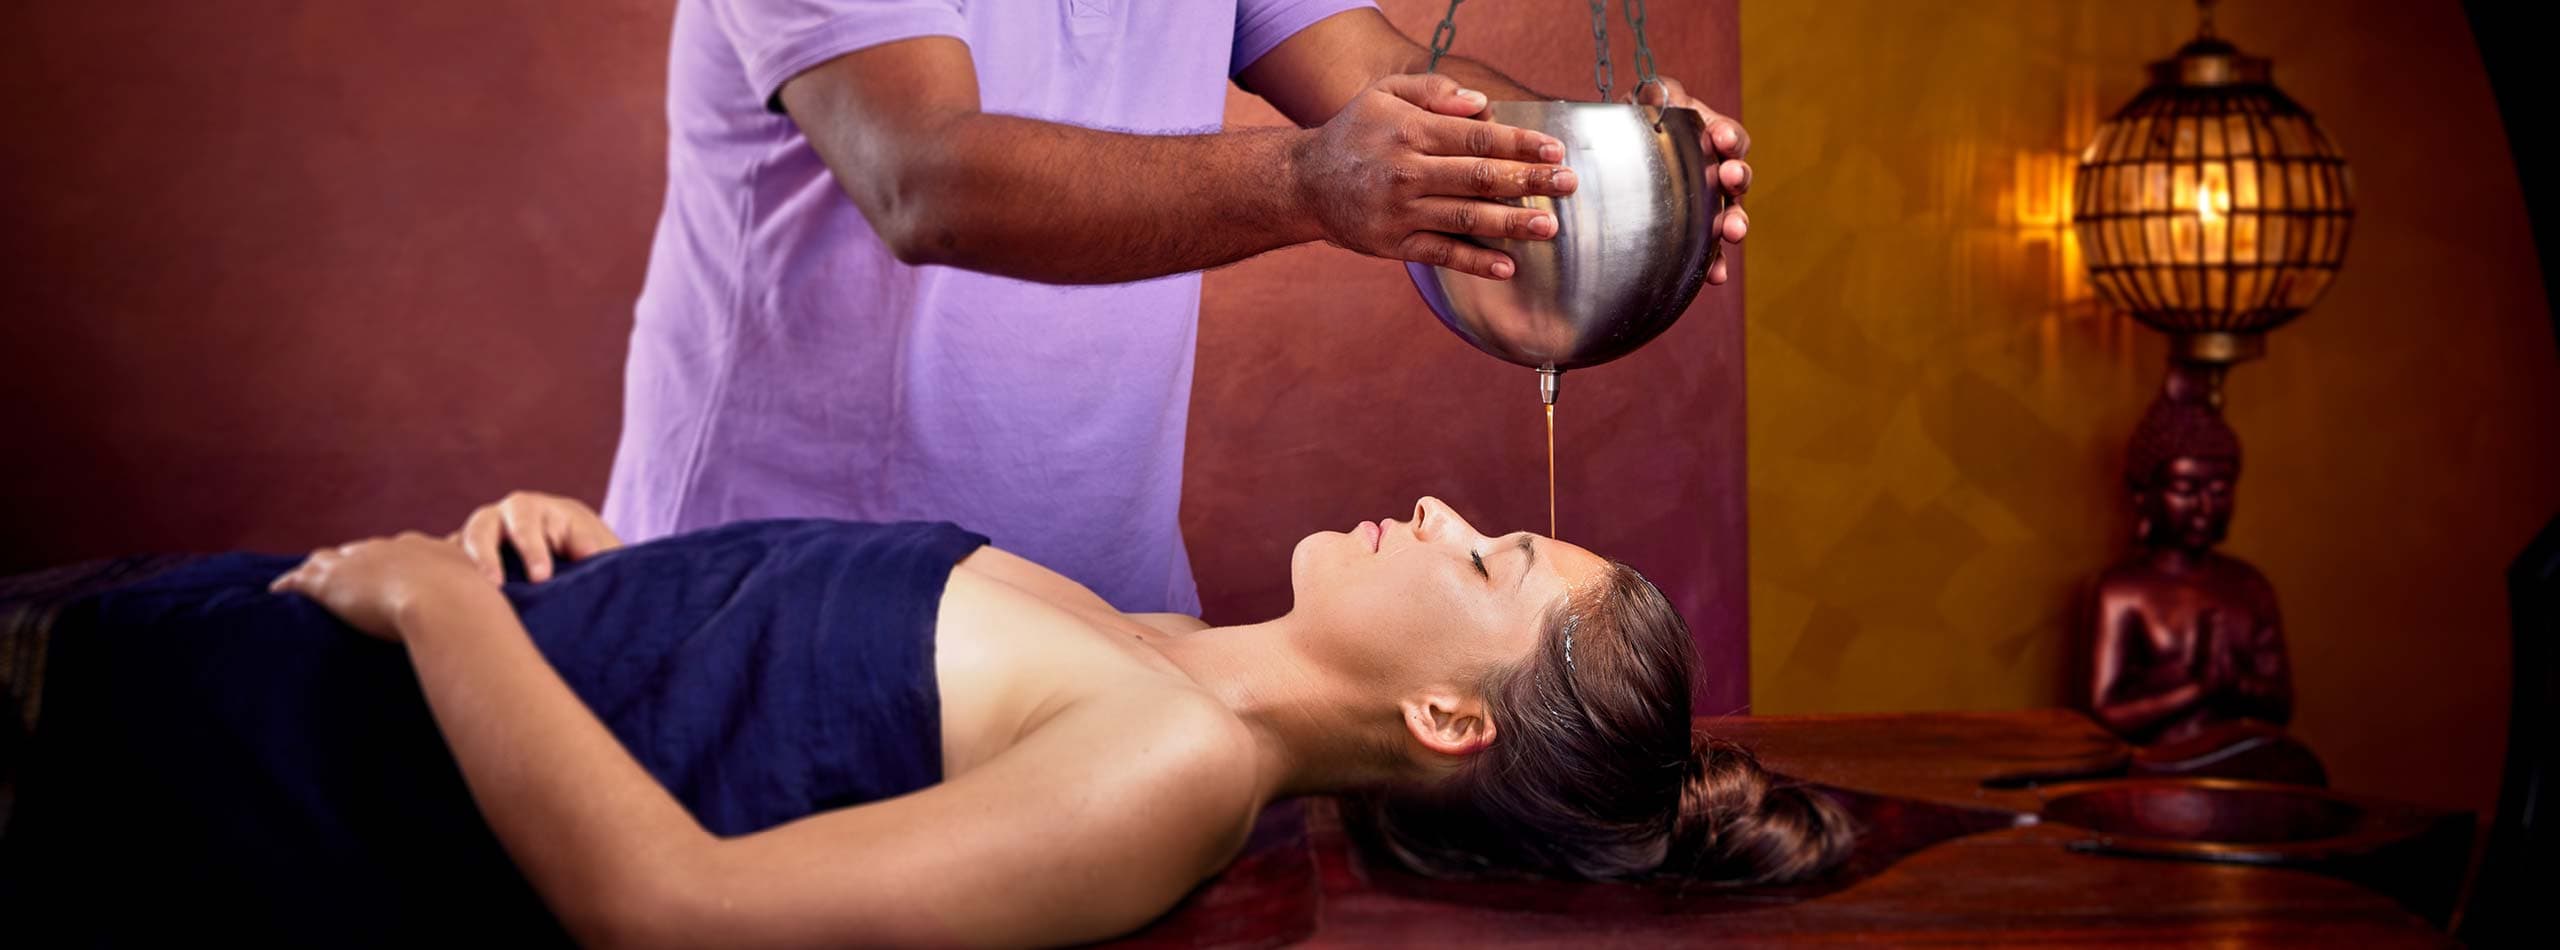 Ayurveda Journal – everything you need to know about Ayurveda in Europe 